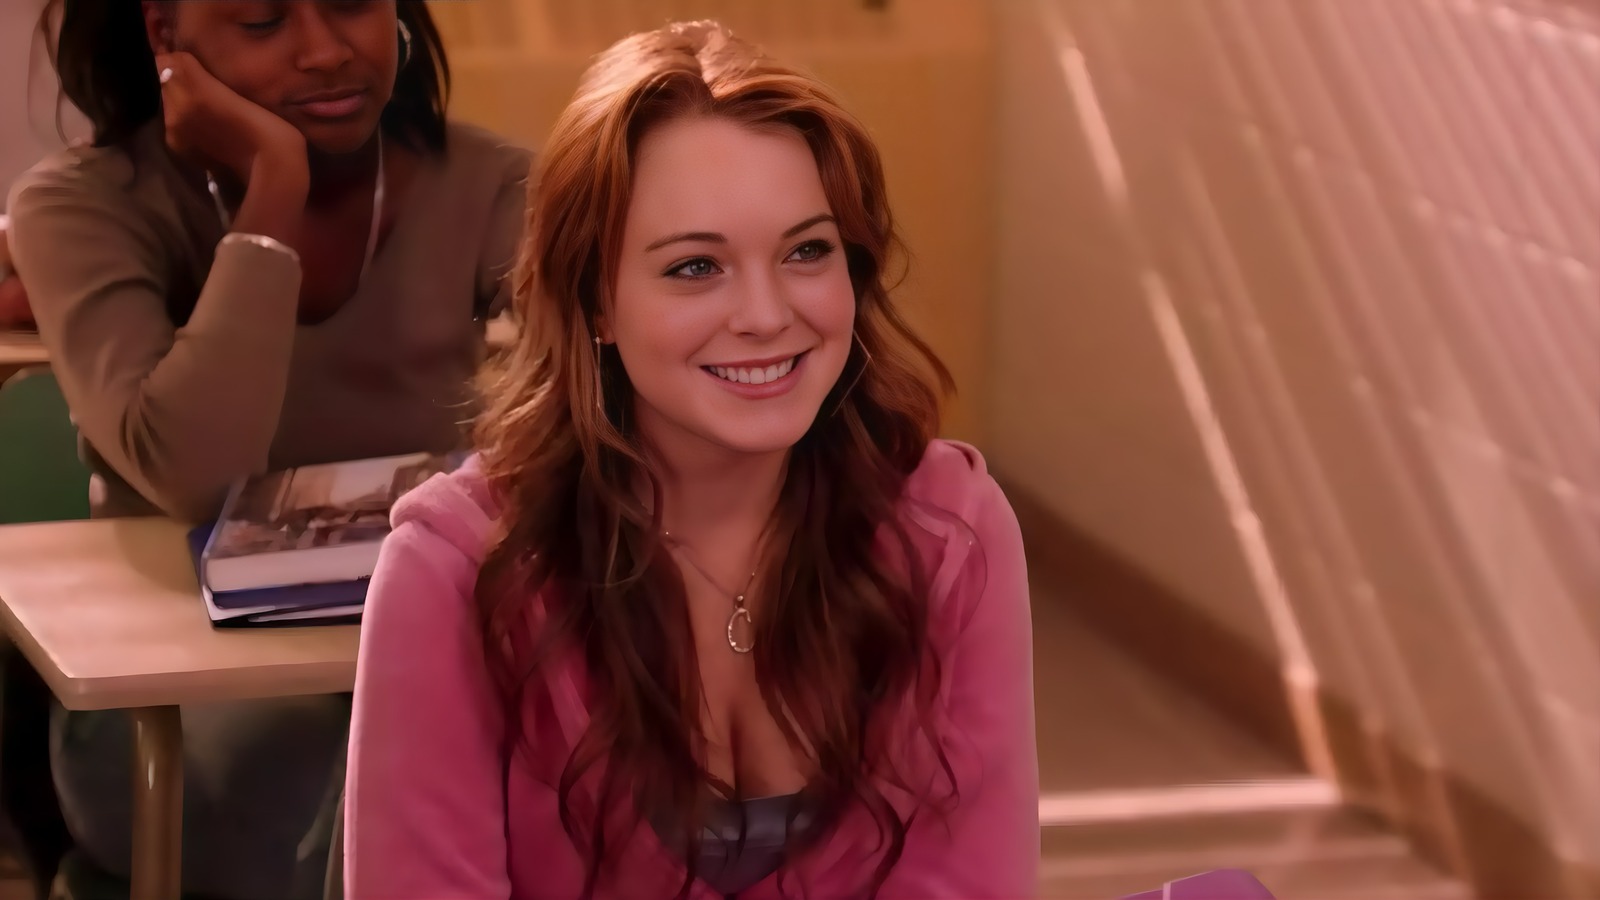 The Mean Girls Musical Digital Release Removed A Lindsay Lohan Joke From The Theatrical Cut